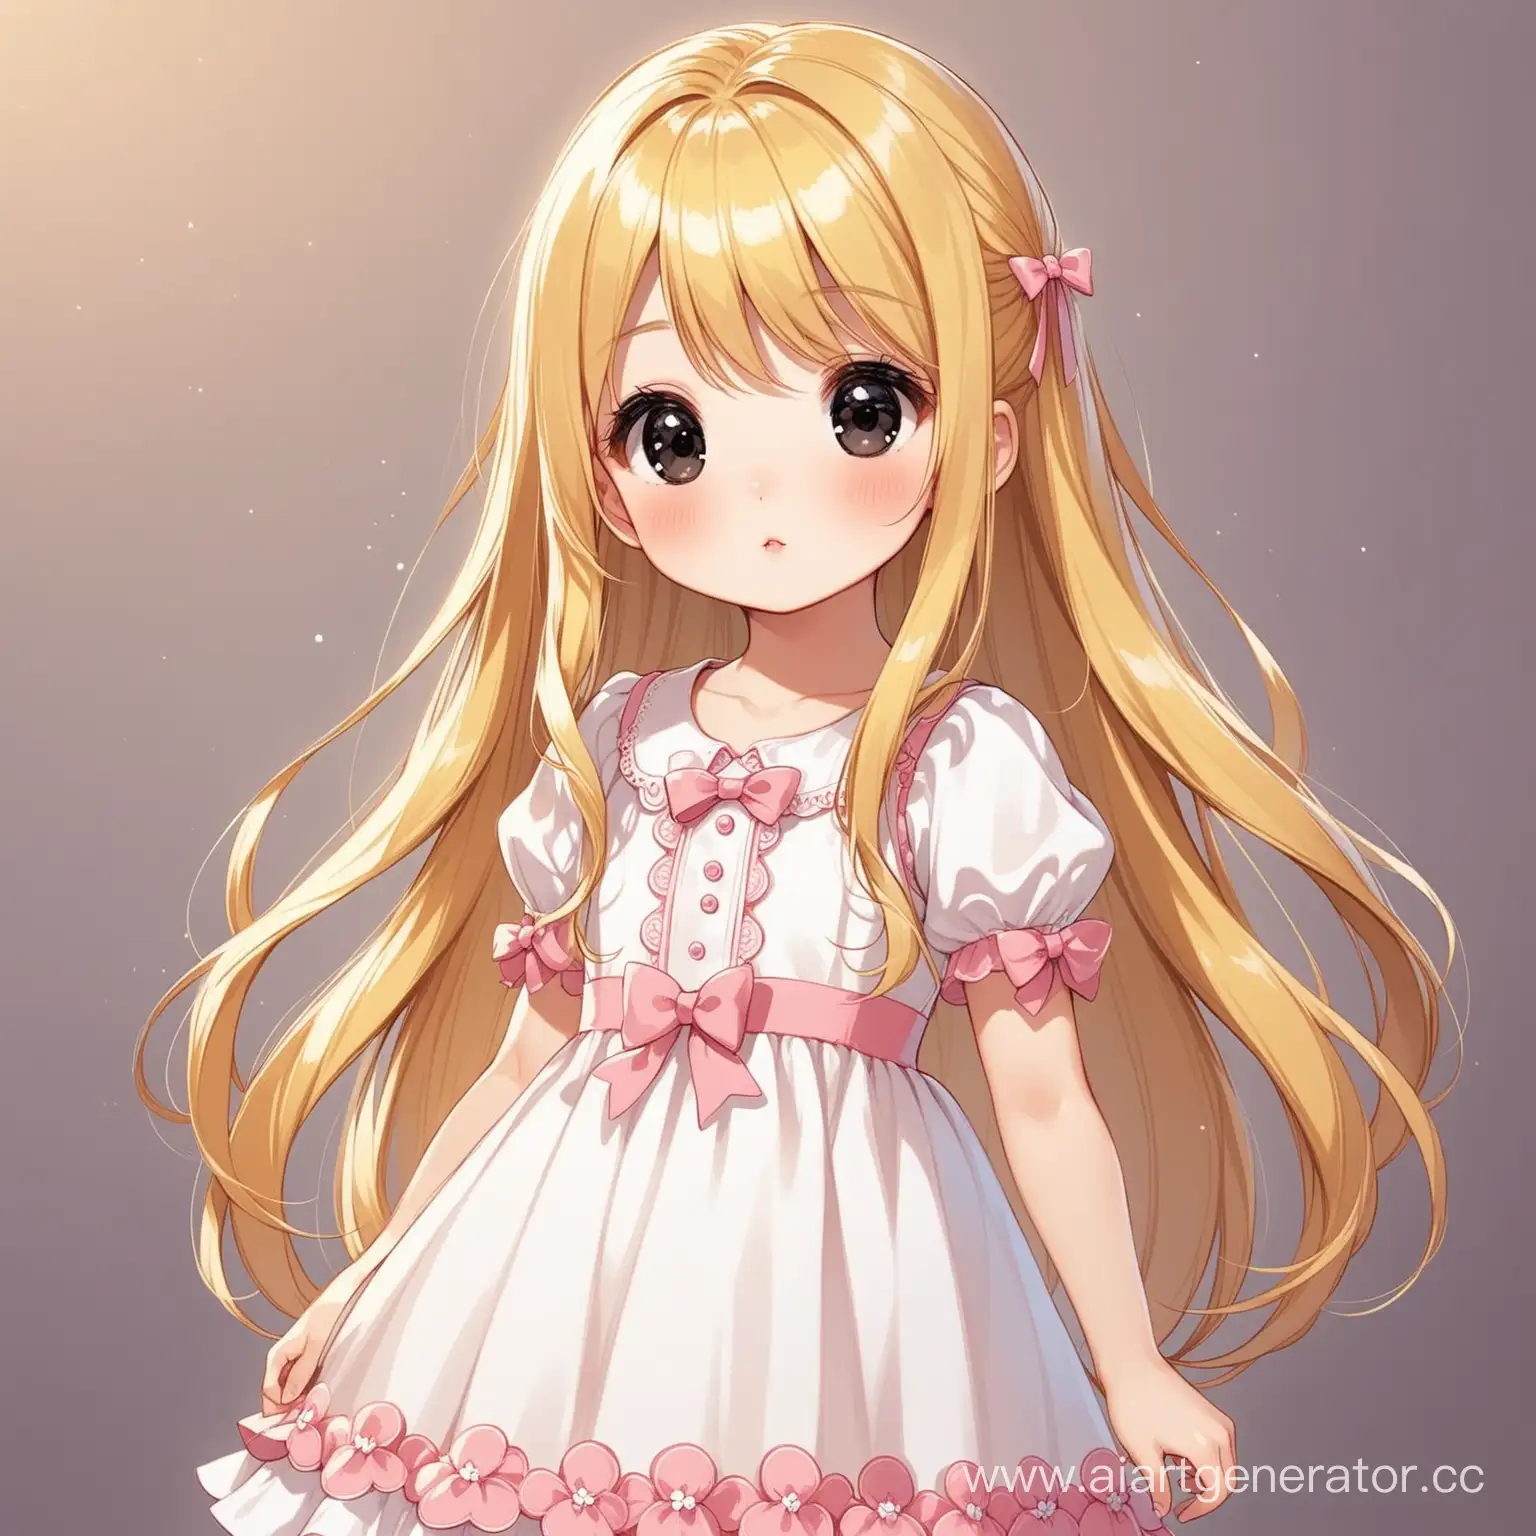 Adorable-Little-Girl-with-Long-Blonde-Hair-and-Black-Eyes-in-a-Cute-Dress